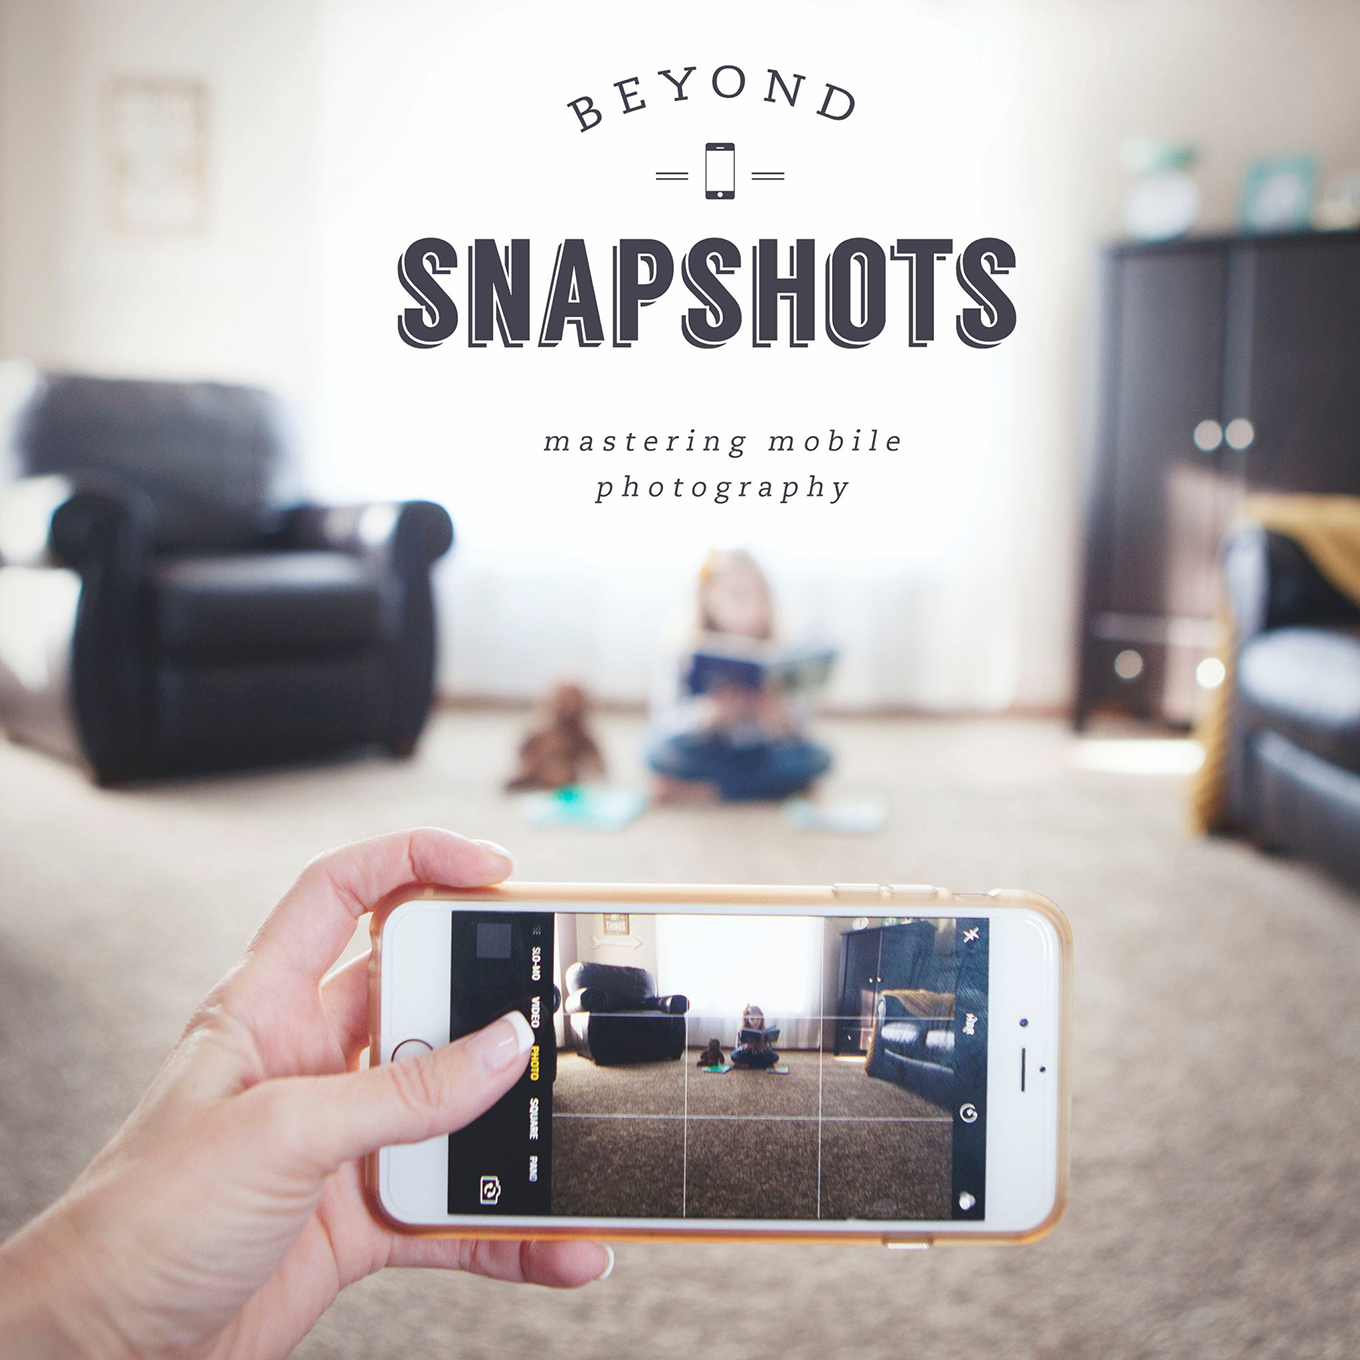 Beyond Snapshots: Mastering the Art of Mobile Photography